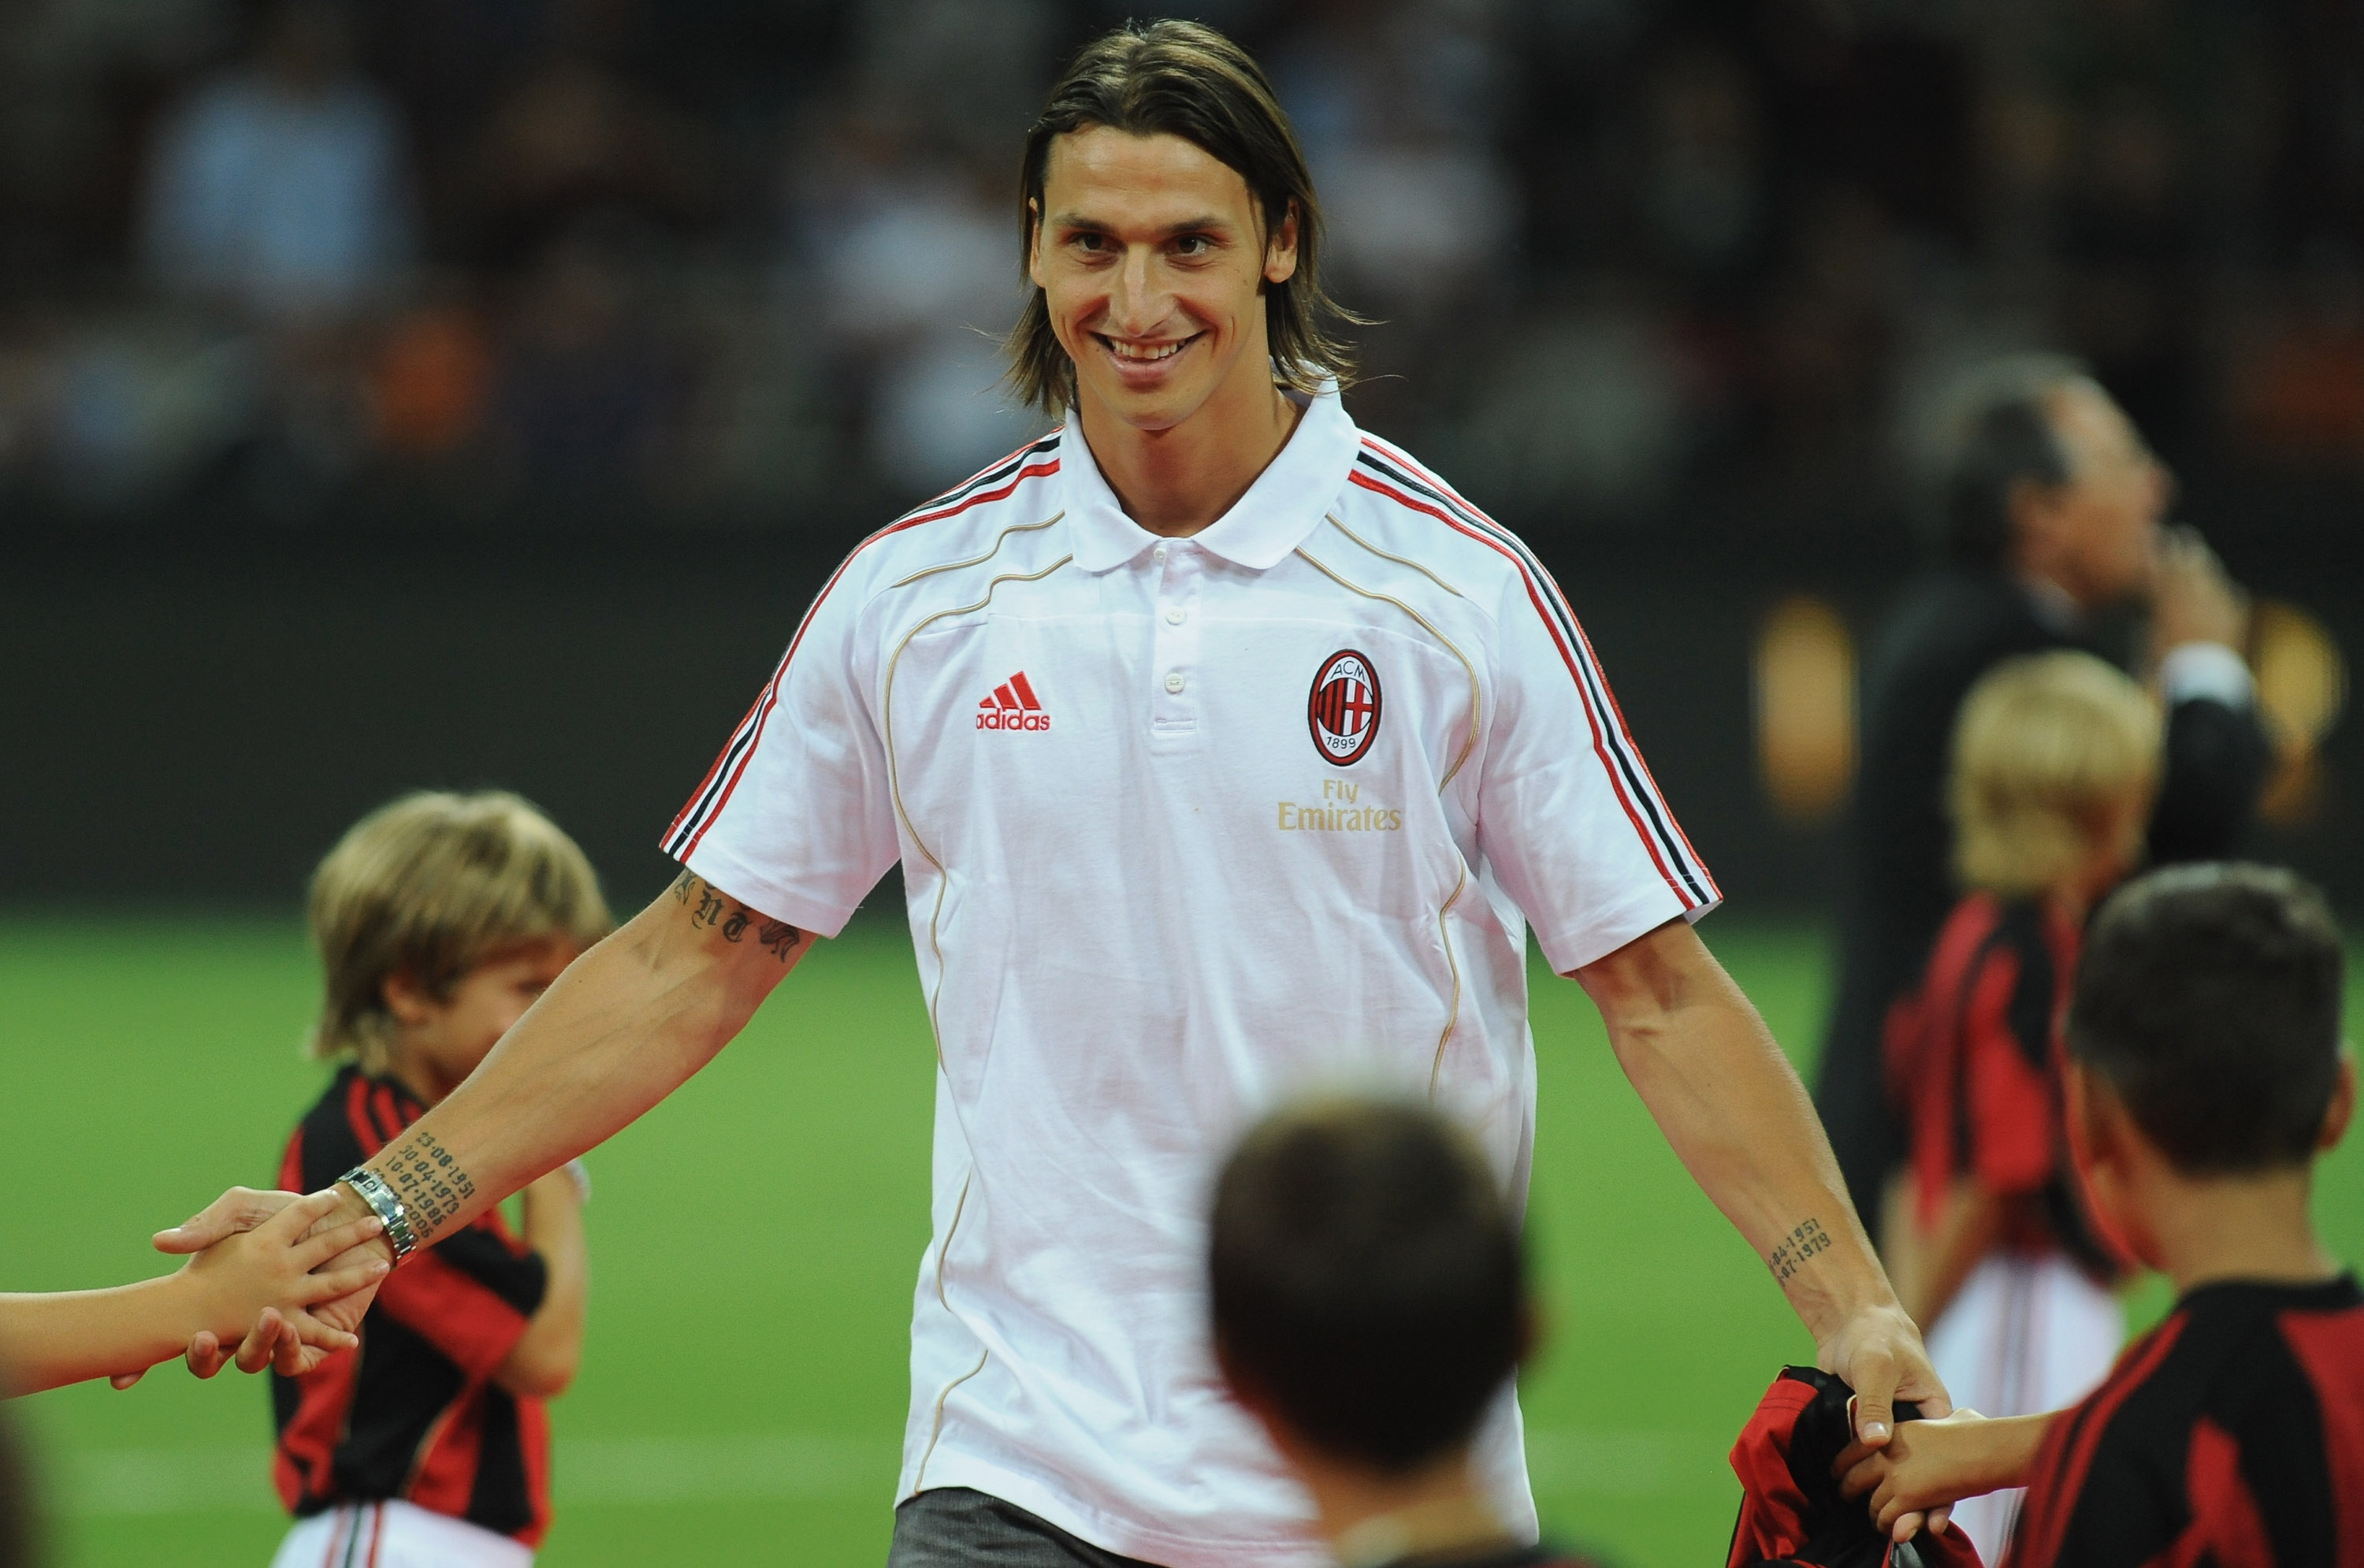 Ibrahimovic was unveiled to the Milan fans at the Lecce match on August 29th.